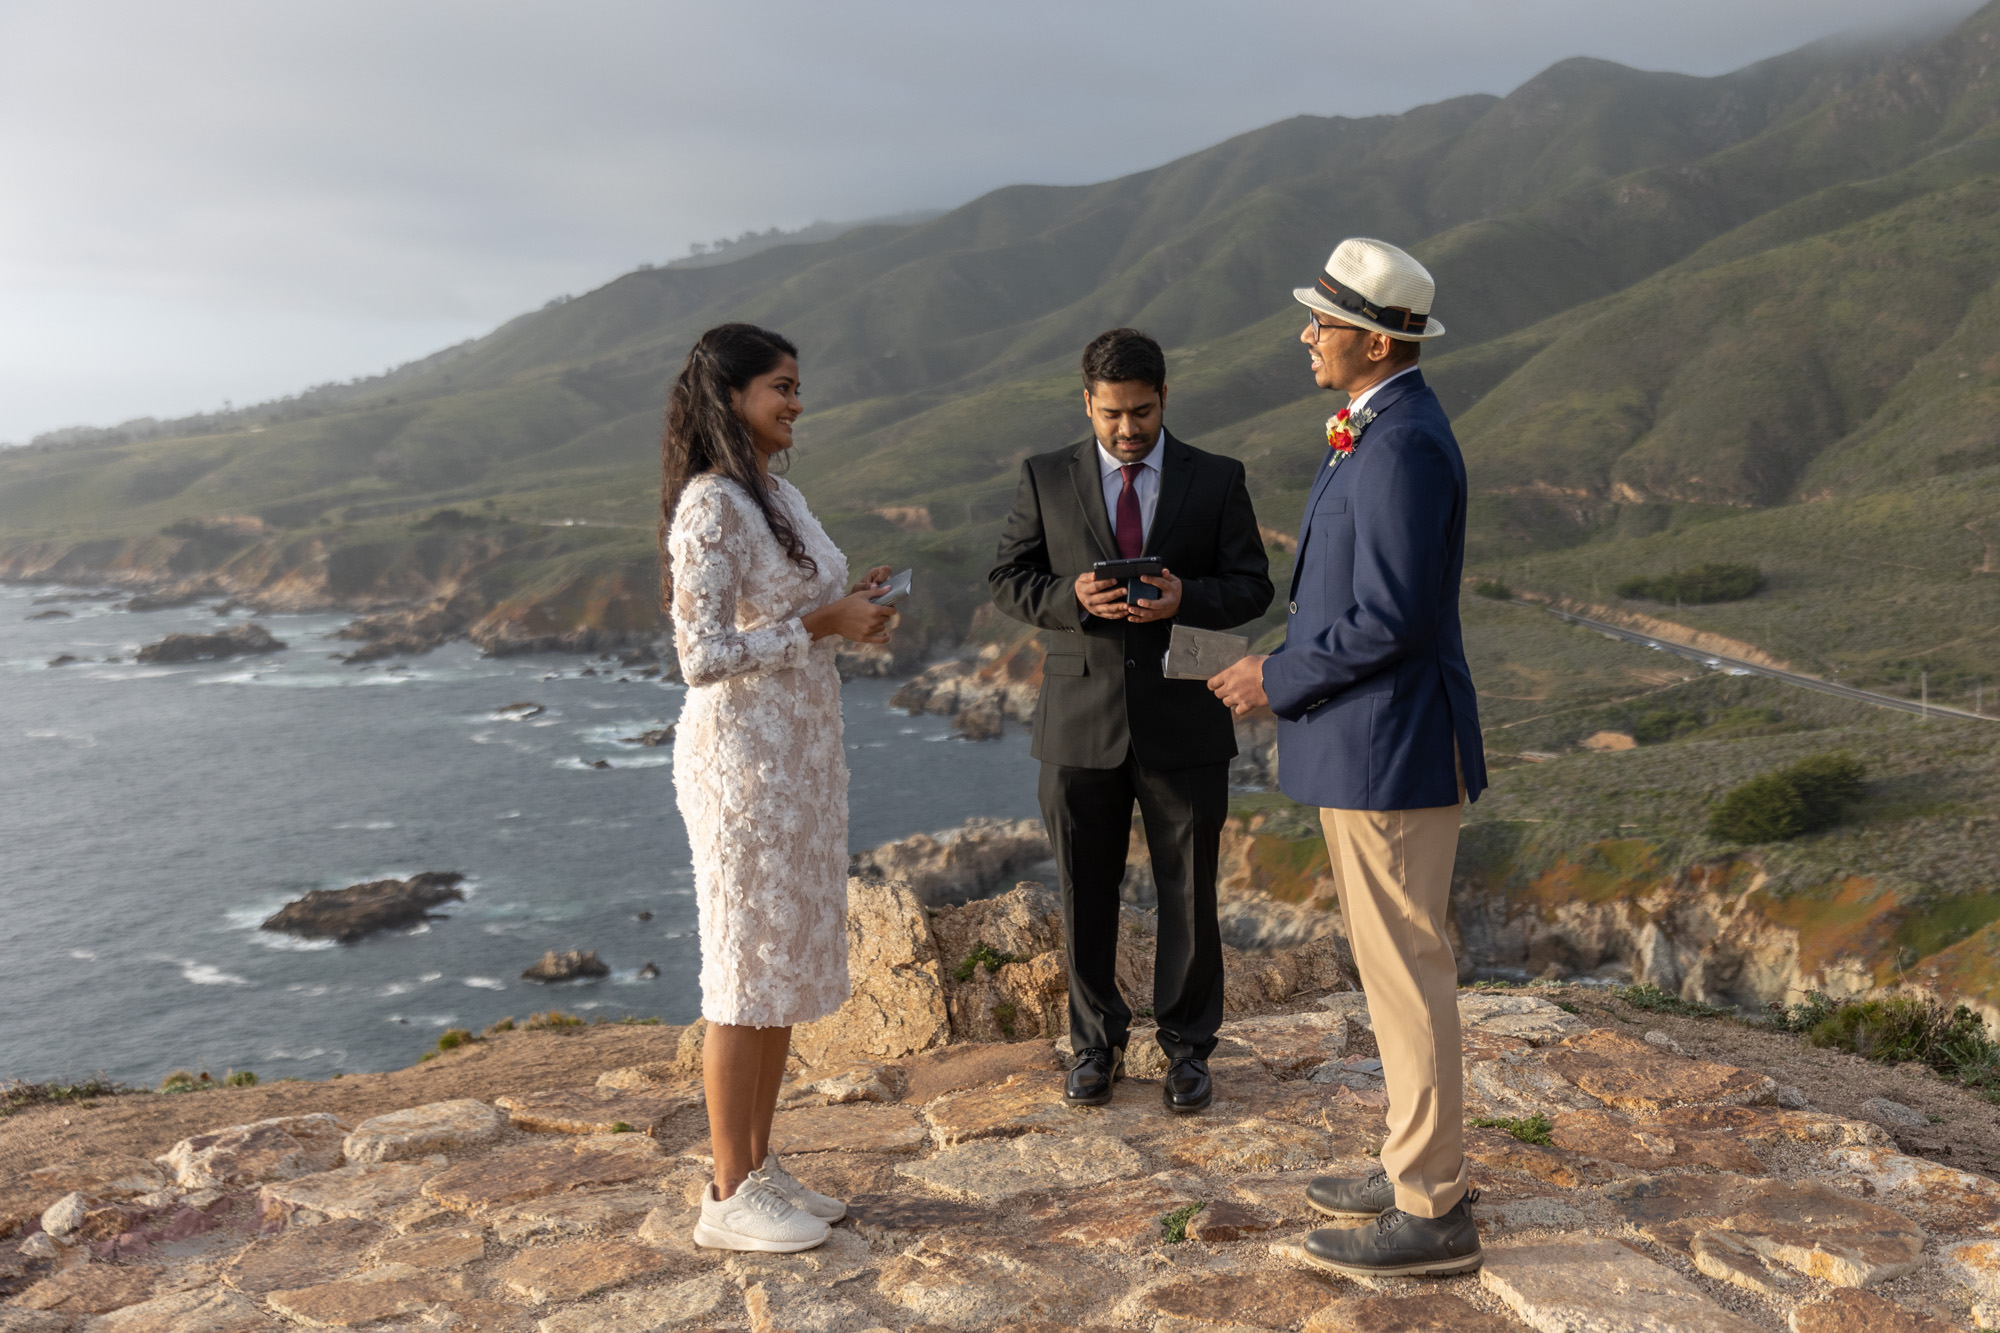 A bride and groom smile at each other while the officiant reads during their cliffside wedding ceremony.